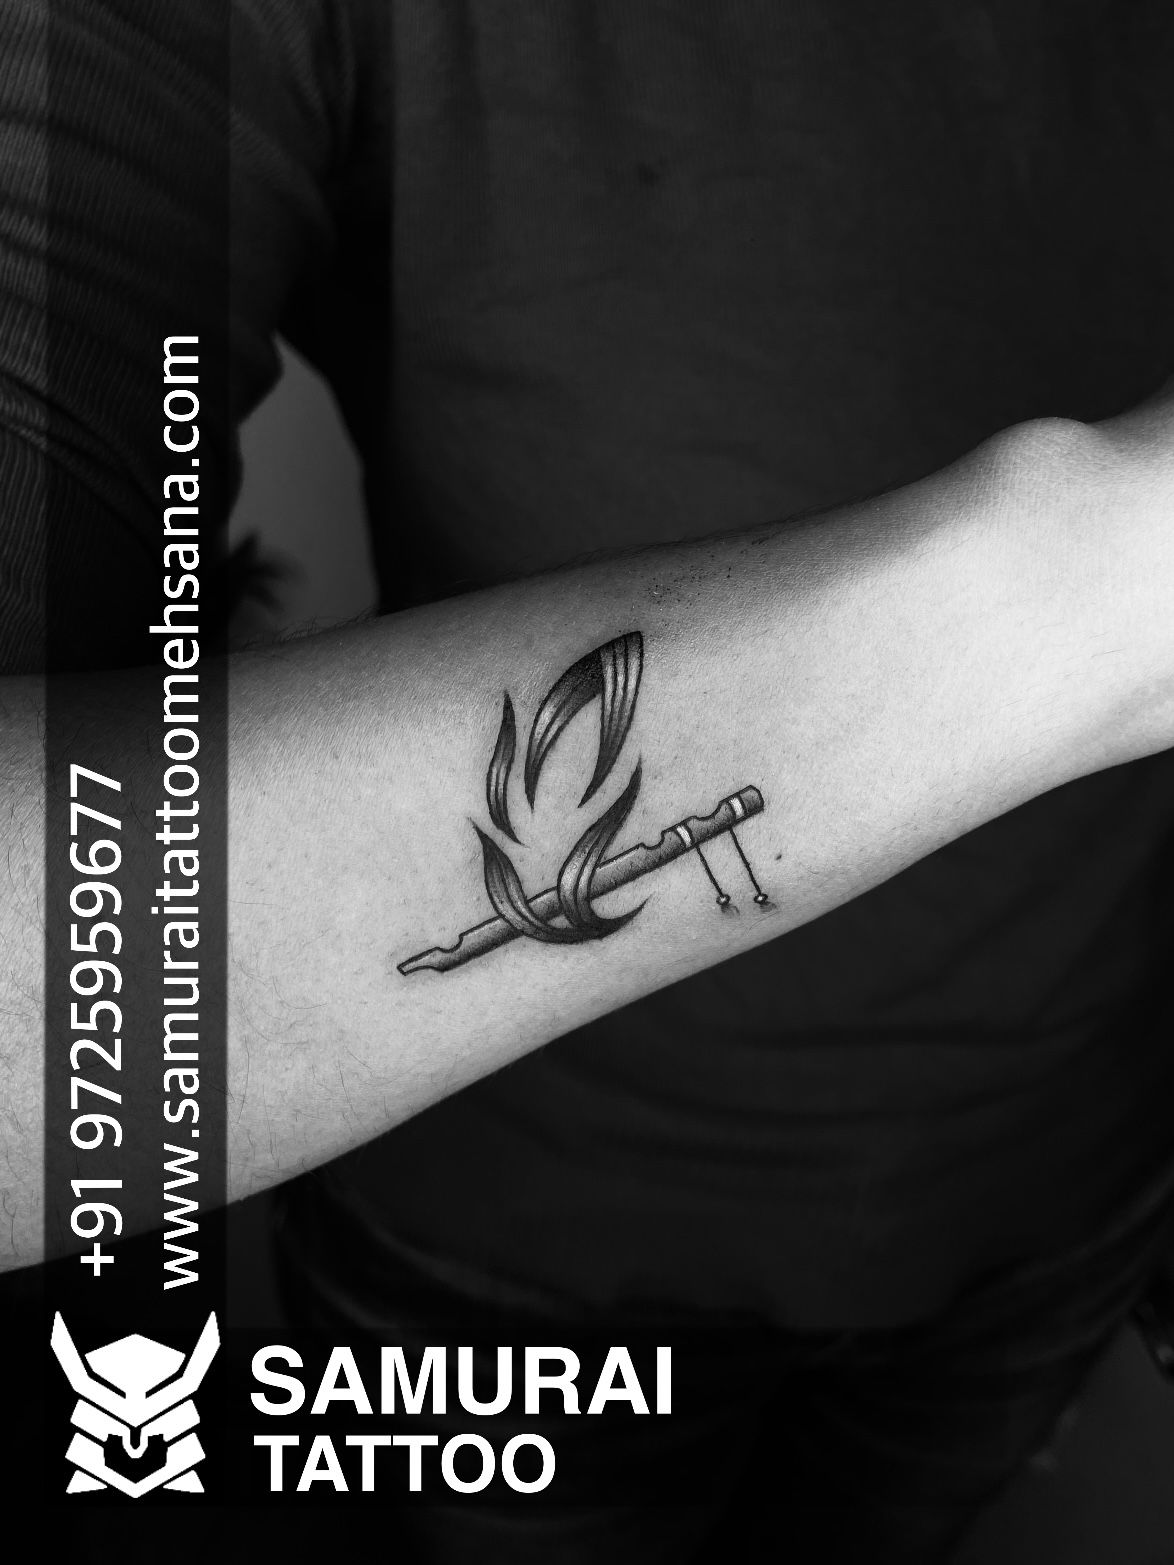 Tattoo uploaded by Vipul Chaudhary • flute with feather tattoo ...